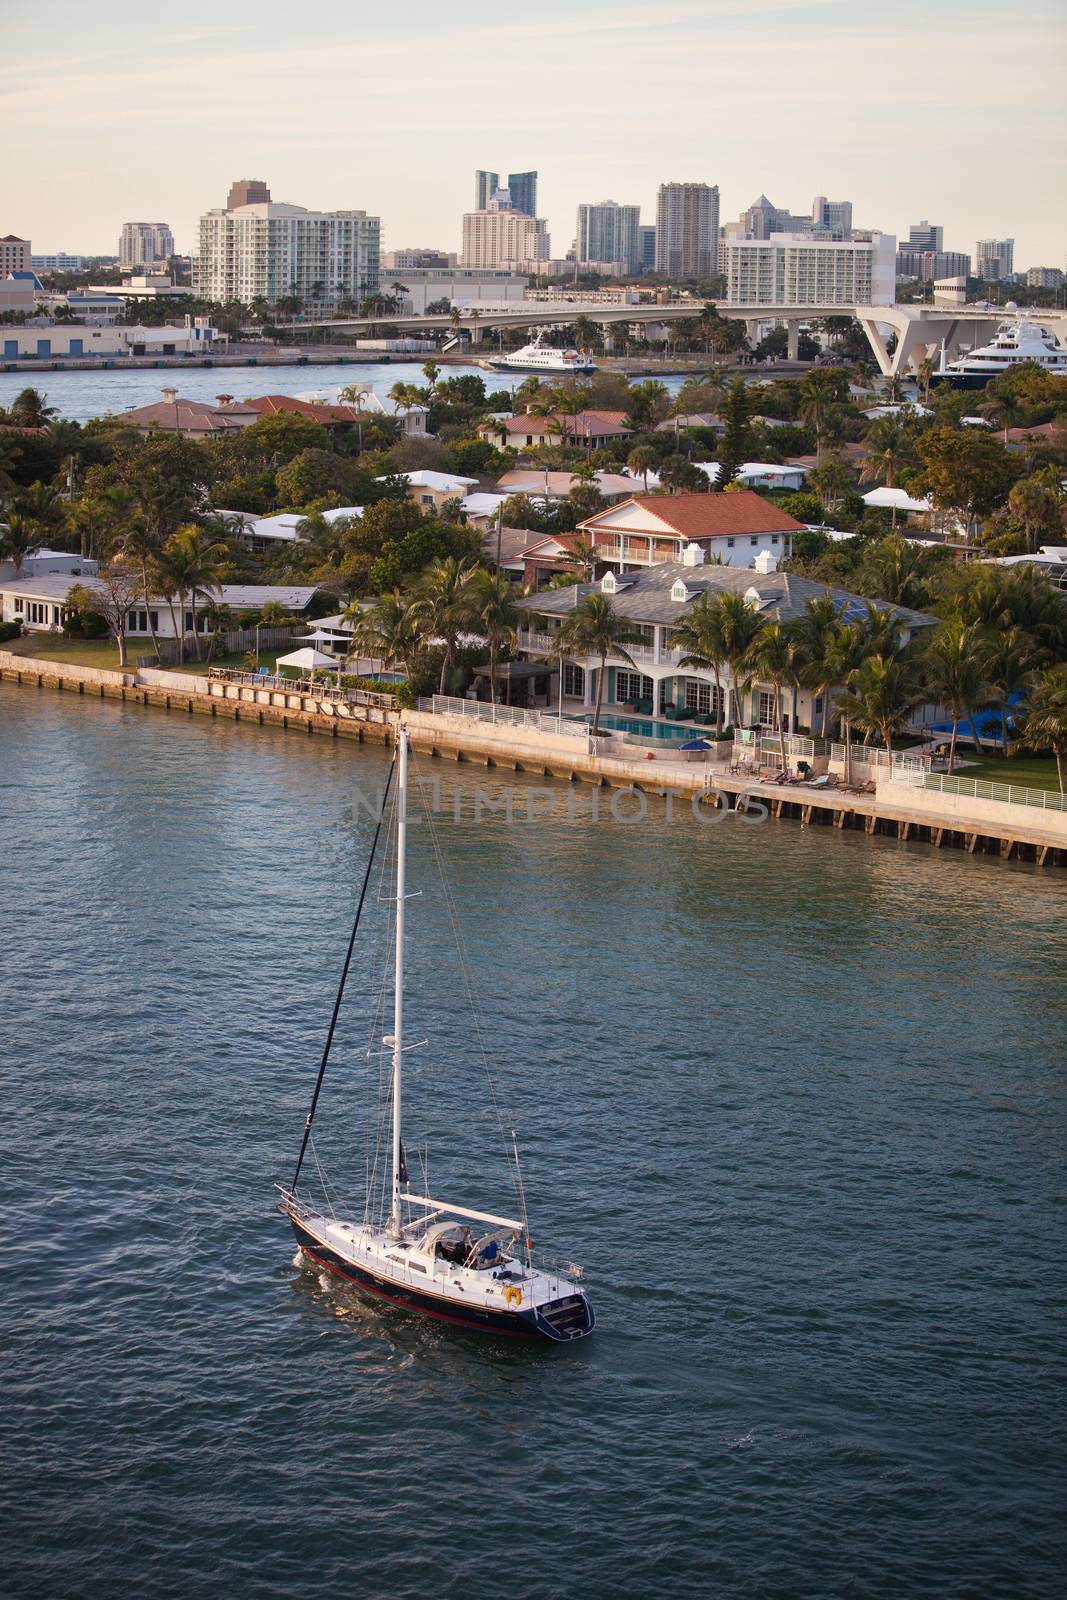 Fort Lauderdale Homes and Skyline with Sailboat by Creatista